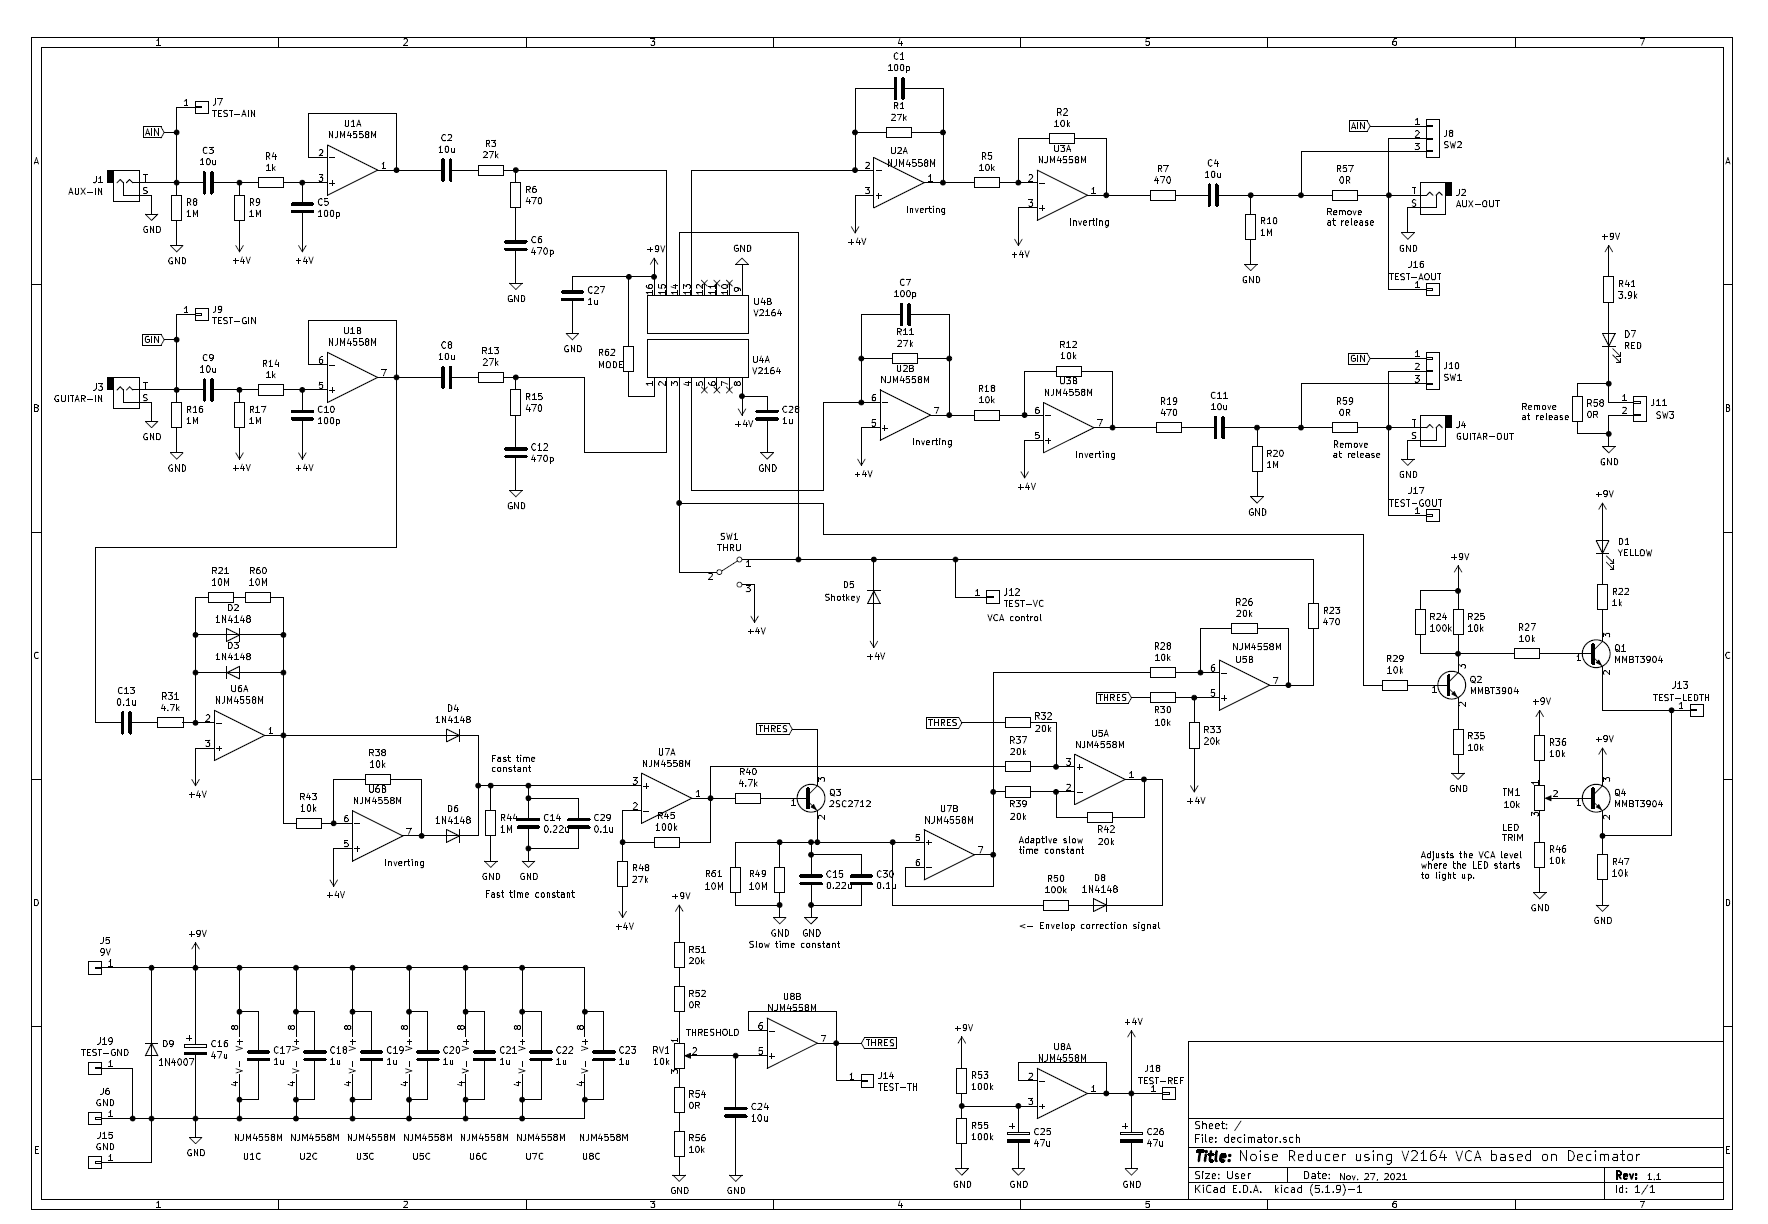 Circuit diagram of self-made noise reduction pedal